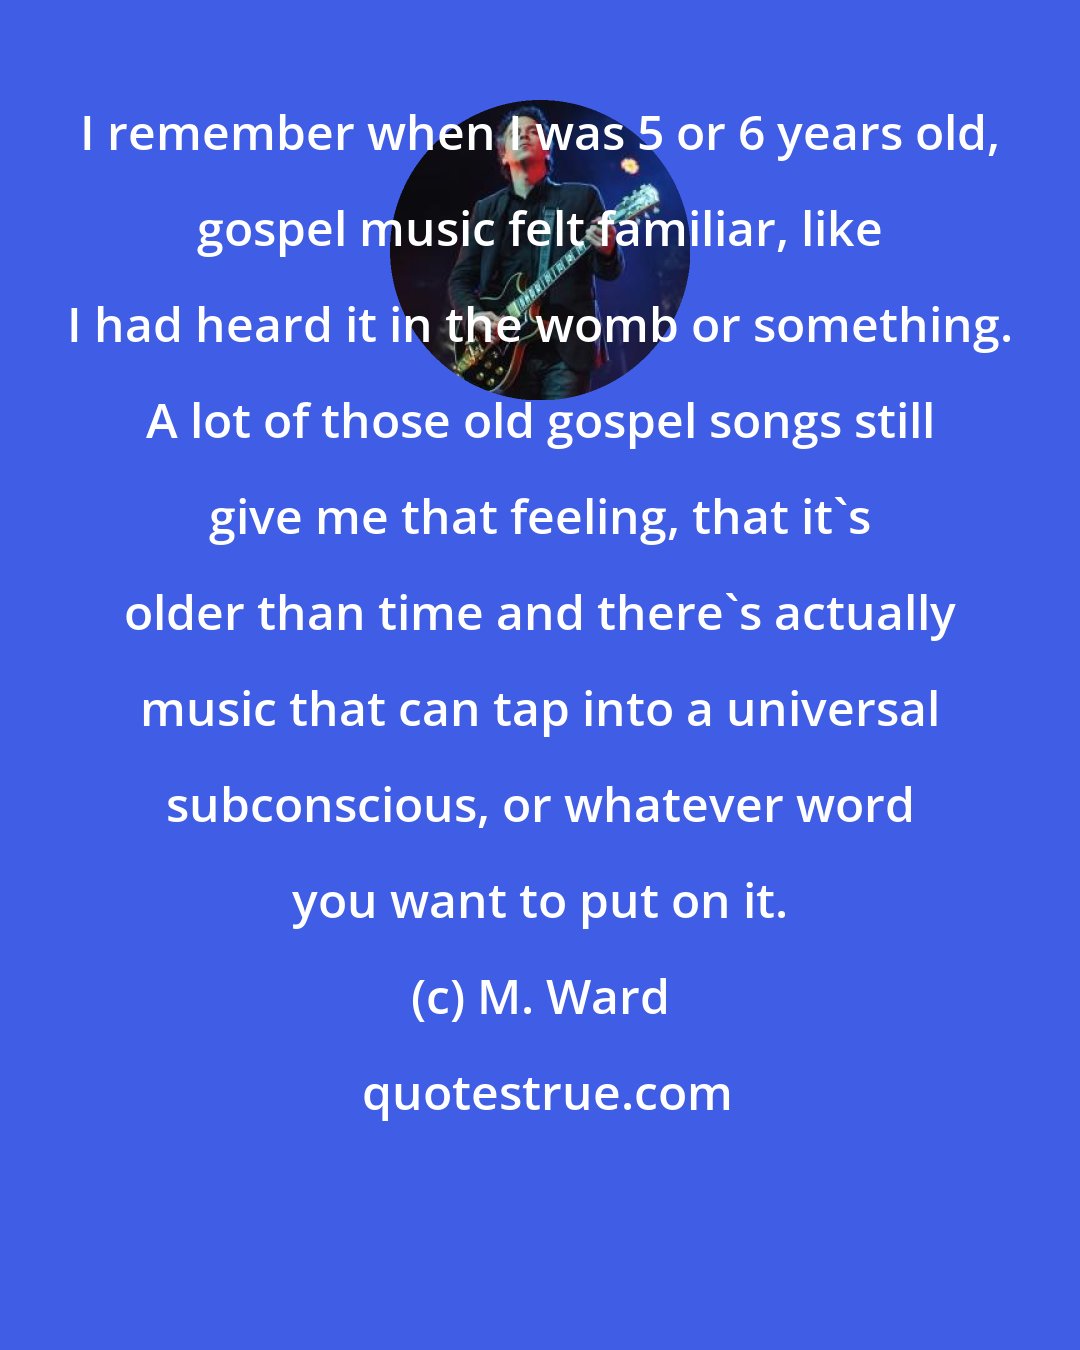 M. Ward: I remember when I was 5 or 6 years old, gospel music felt familiar, like I had heard it in the womb or something. A lot of those old gospel songs still give me that feeling, that it's older than time and there's actually music that can tap into a universal subconscious, or whatever word you want to put on it.